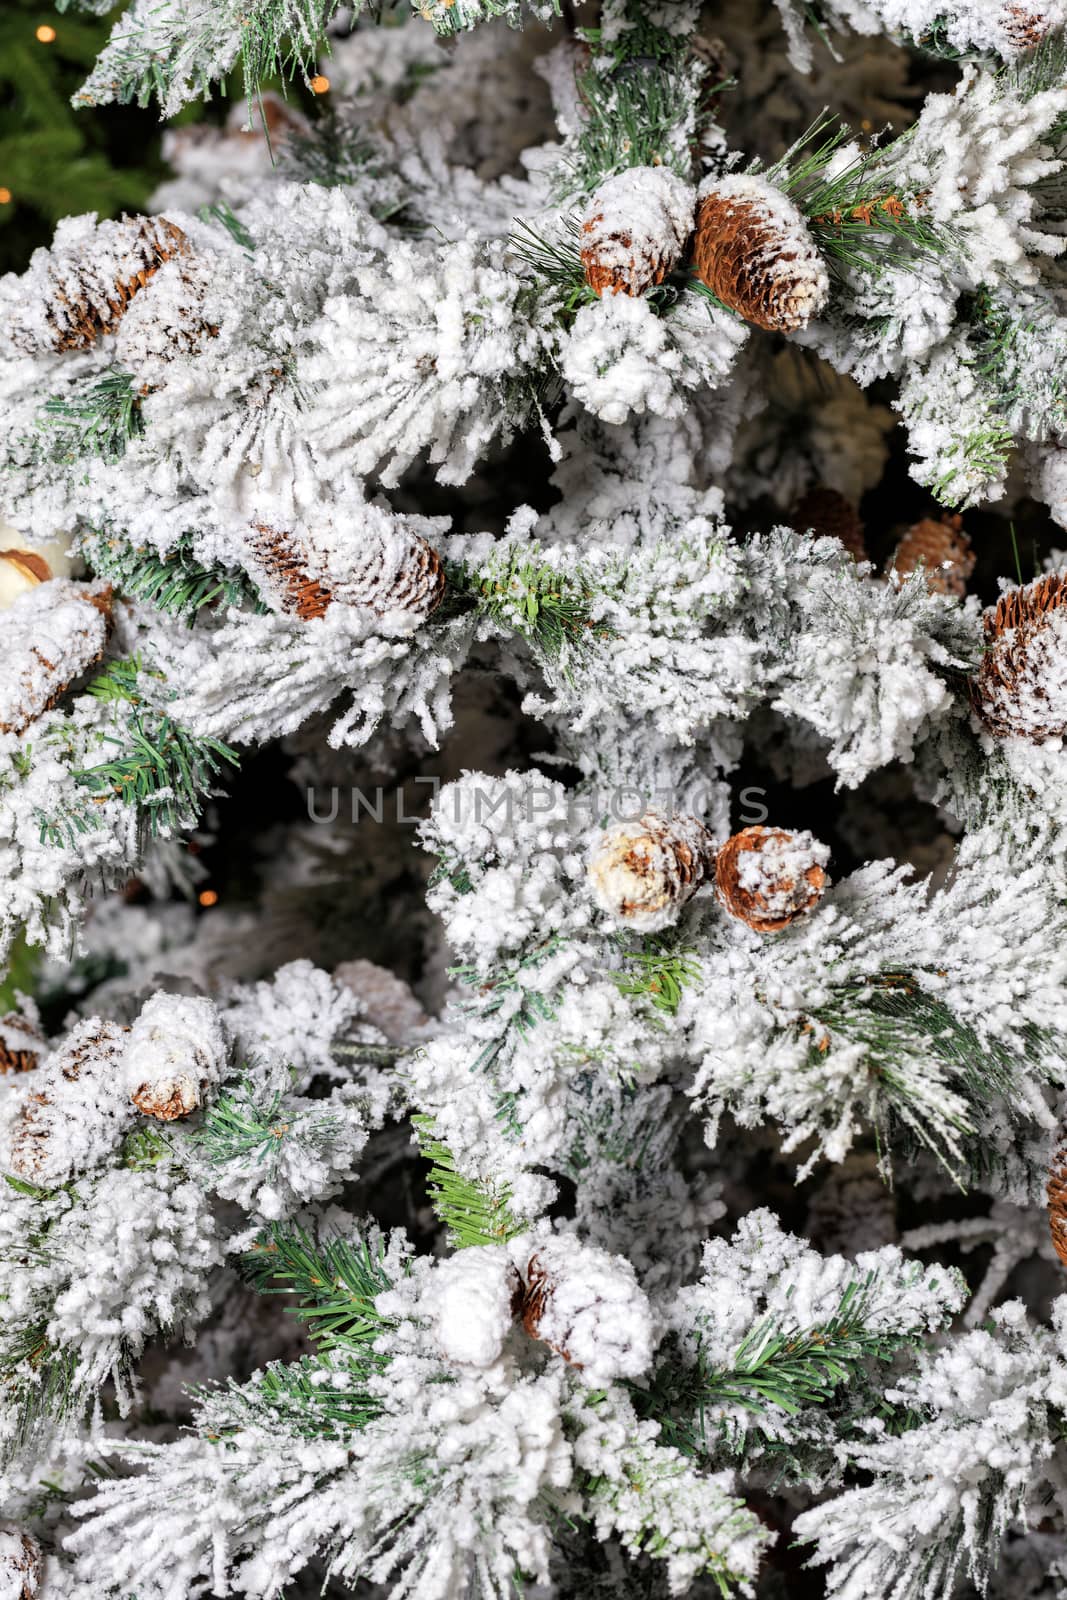 Decorative cones fir branches sprinkled with decorative snow, look like real ones. by Sergii